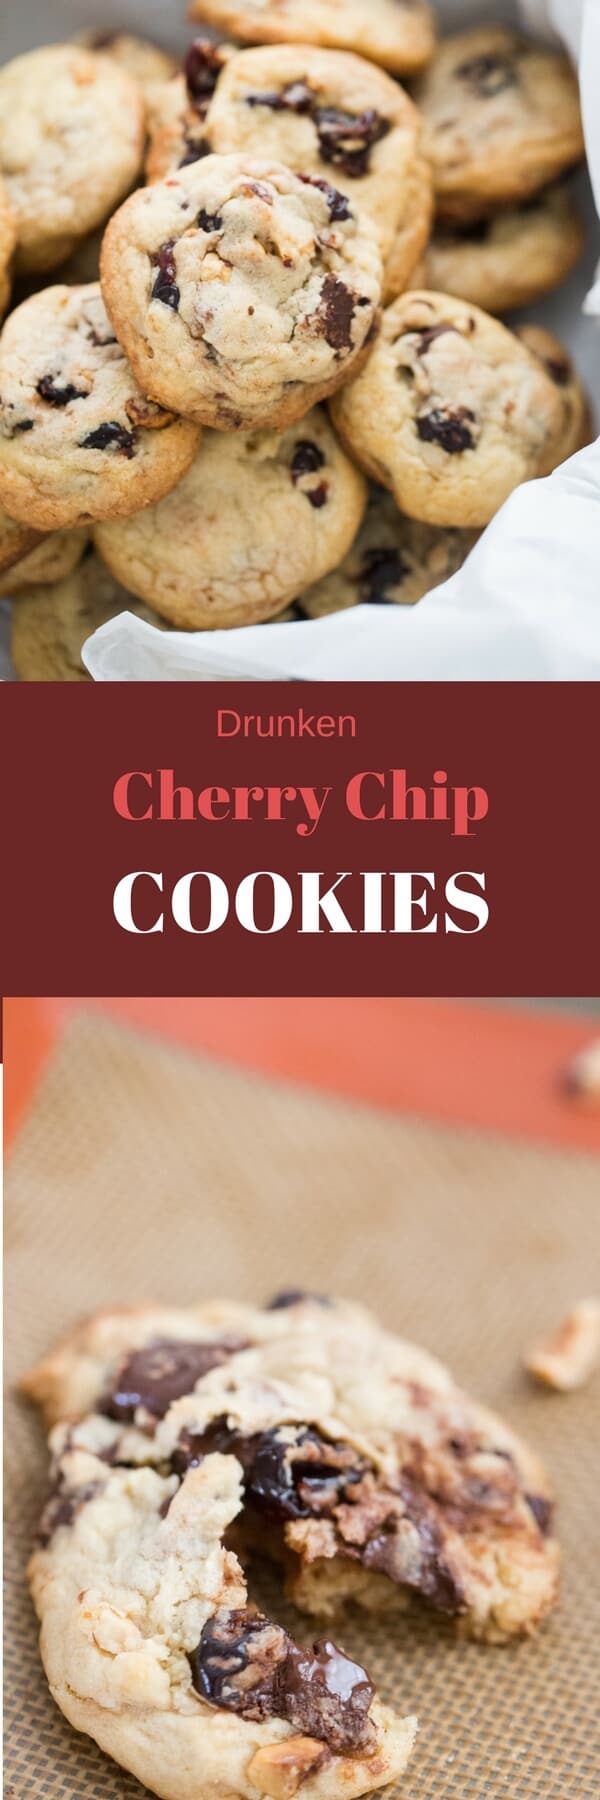 These cherry chip cookies are for the sophisticated cookie lover! Each bit features boozy cherries, chocolate chunks and crunchy hazelnuts!